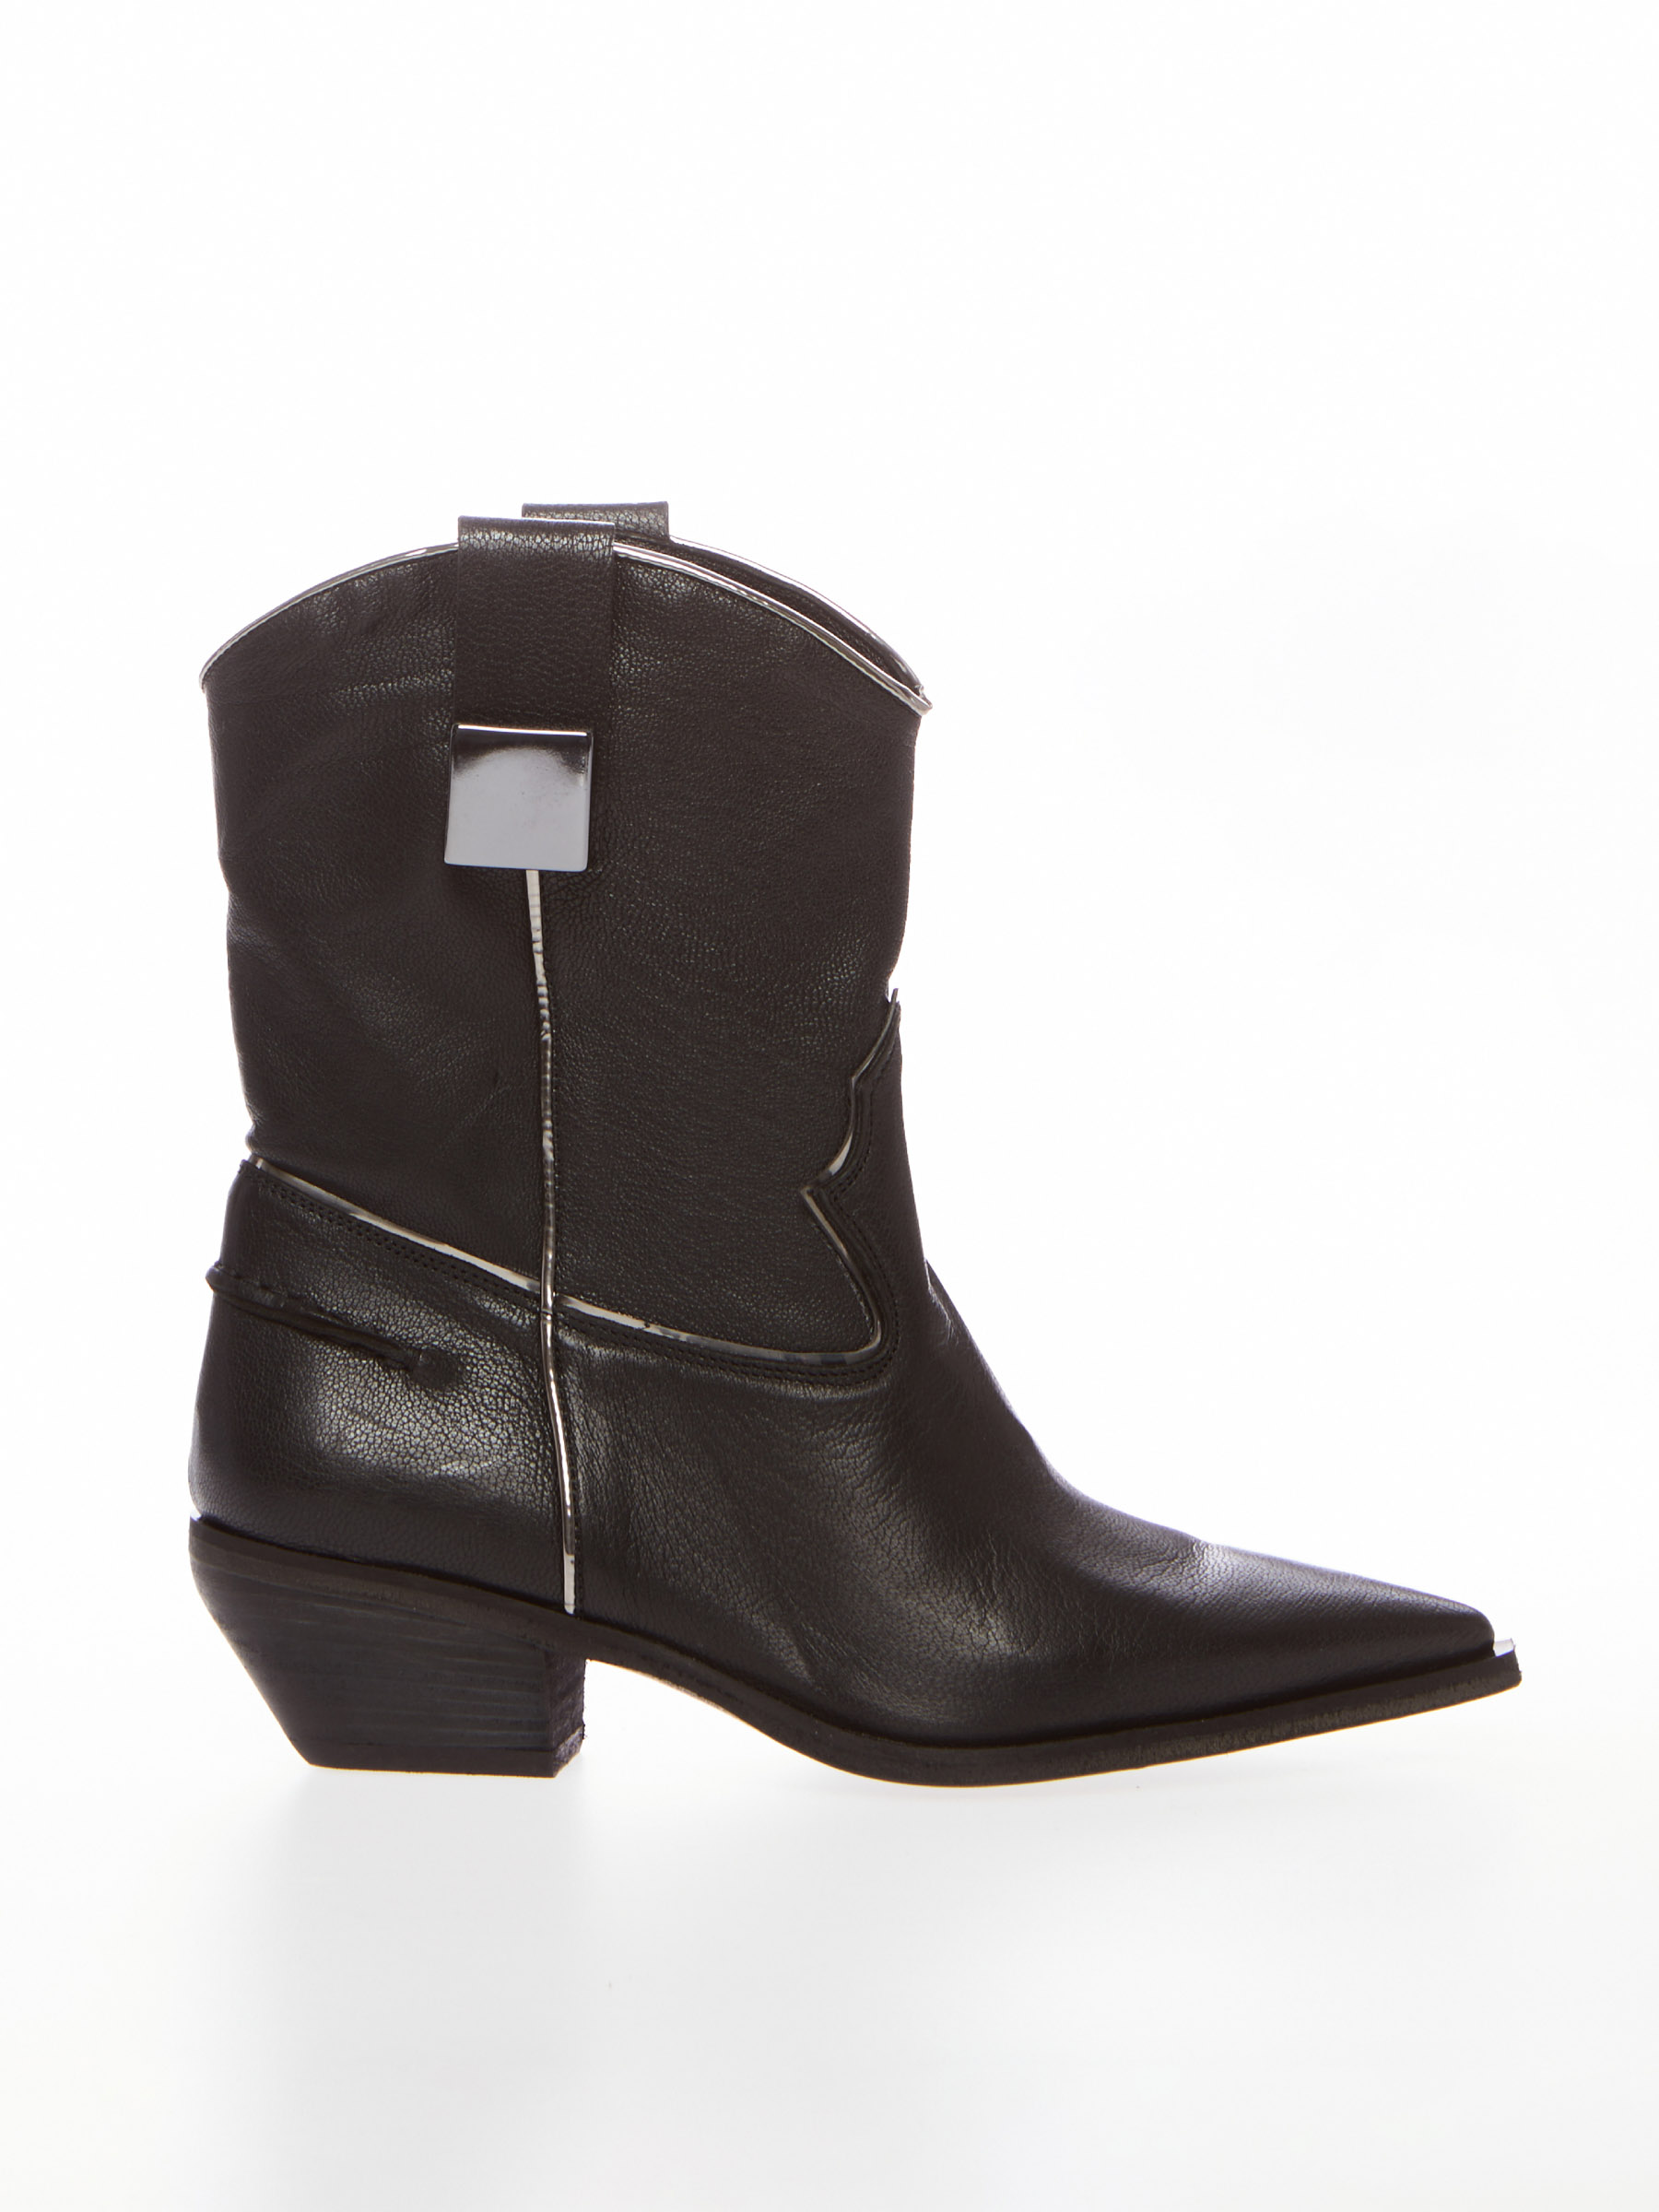 leather cowboy boot lola